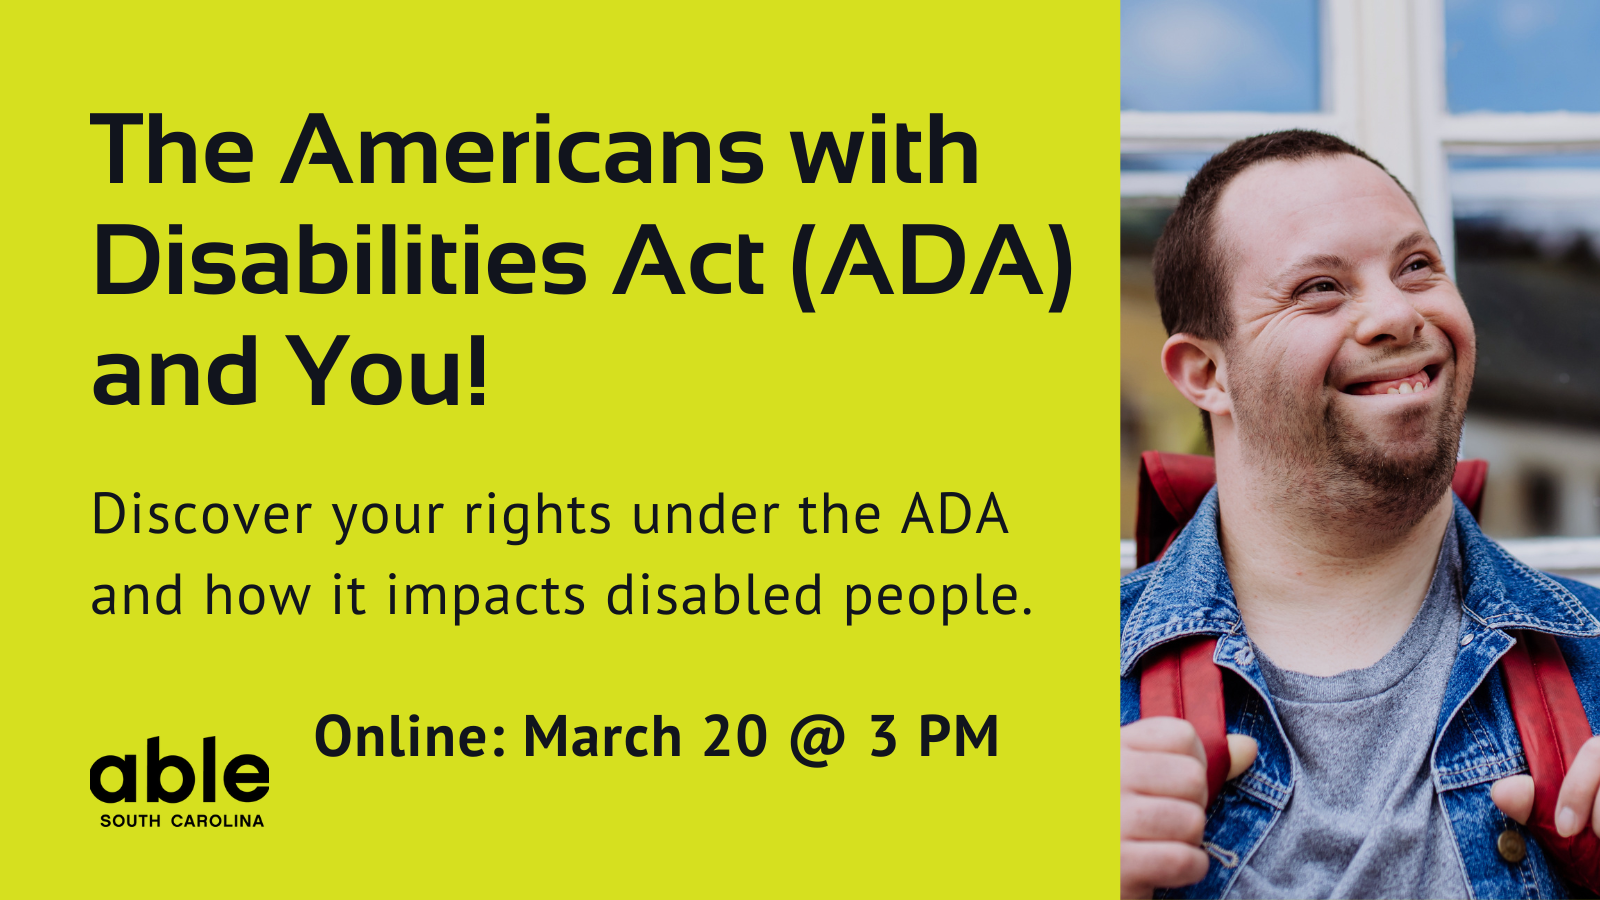 Lime green background graphic with text reading, 'The Americans with Disabilities Act (ADA) and You! Discover your rights under the ADA and how it impacts disabled people. Online March 20 @ 3 pm. Features photo of a developmentally disabled man, Able logo